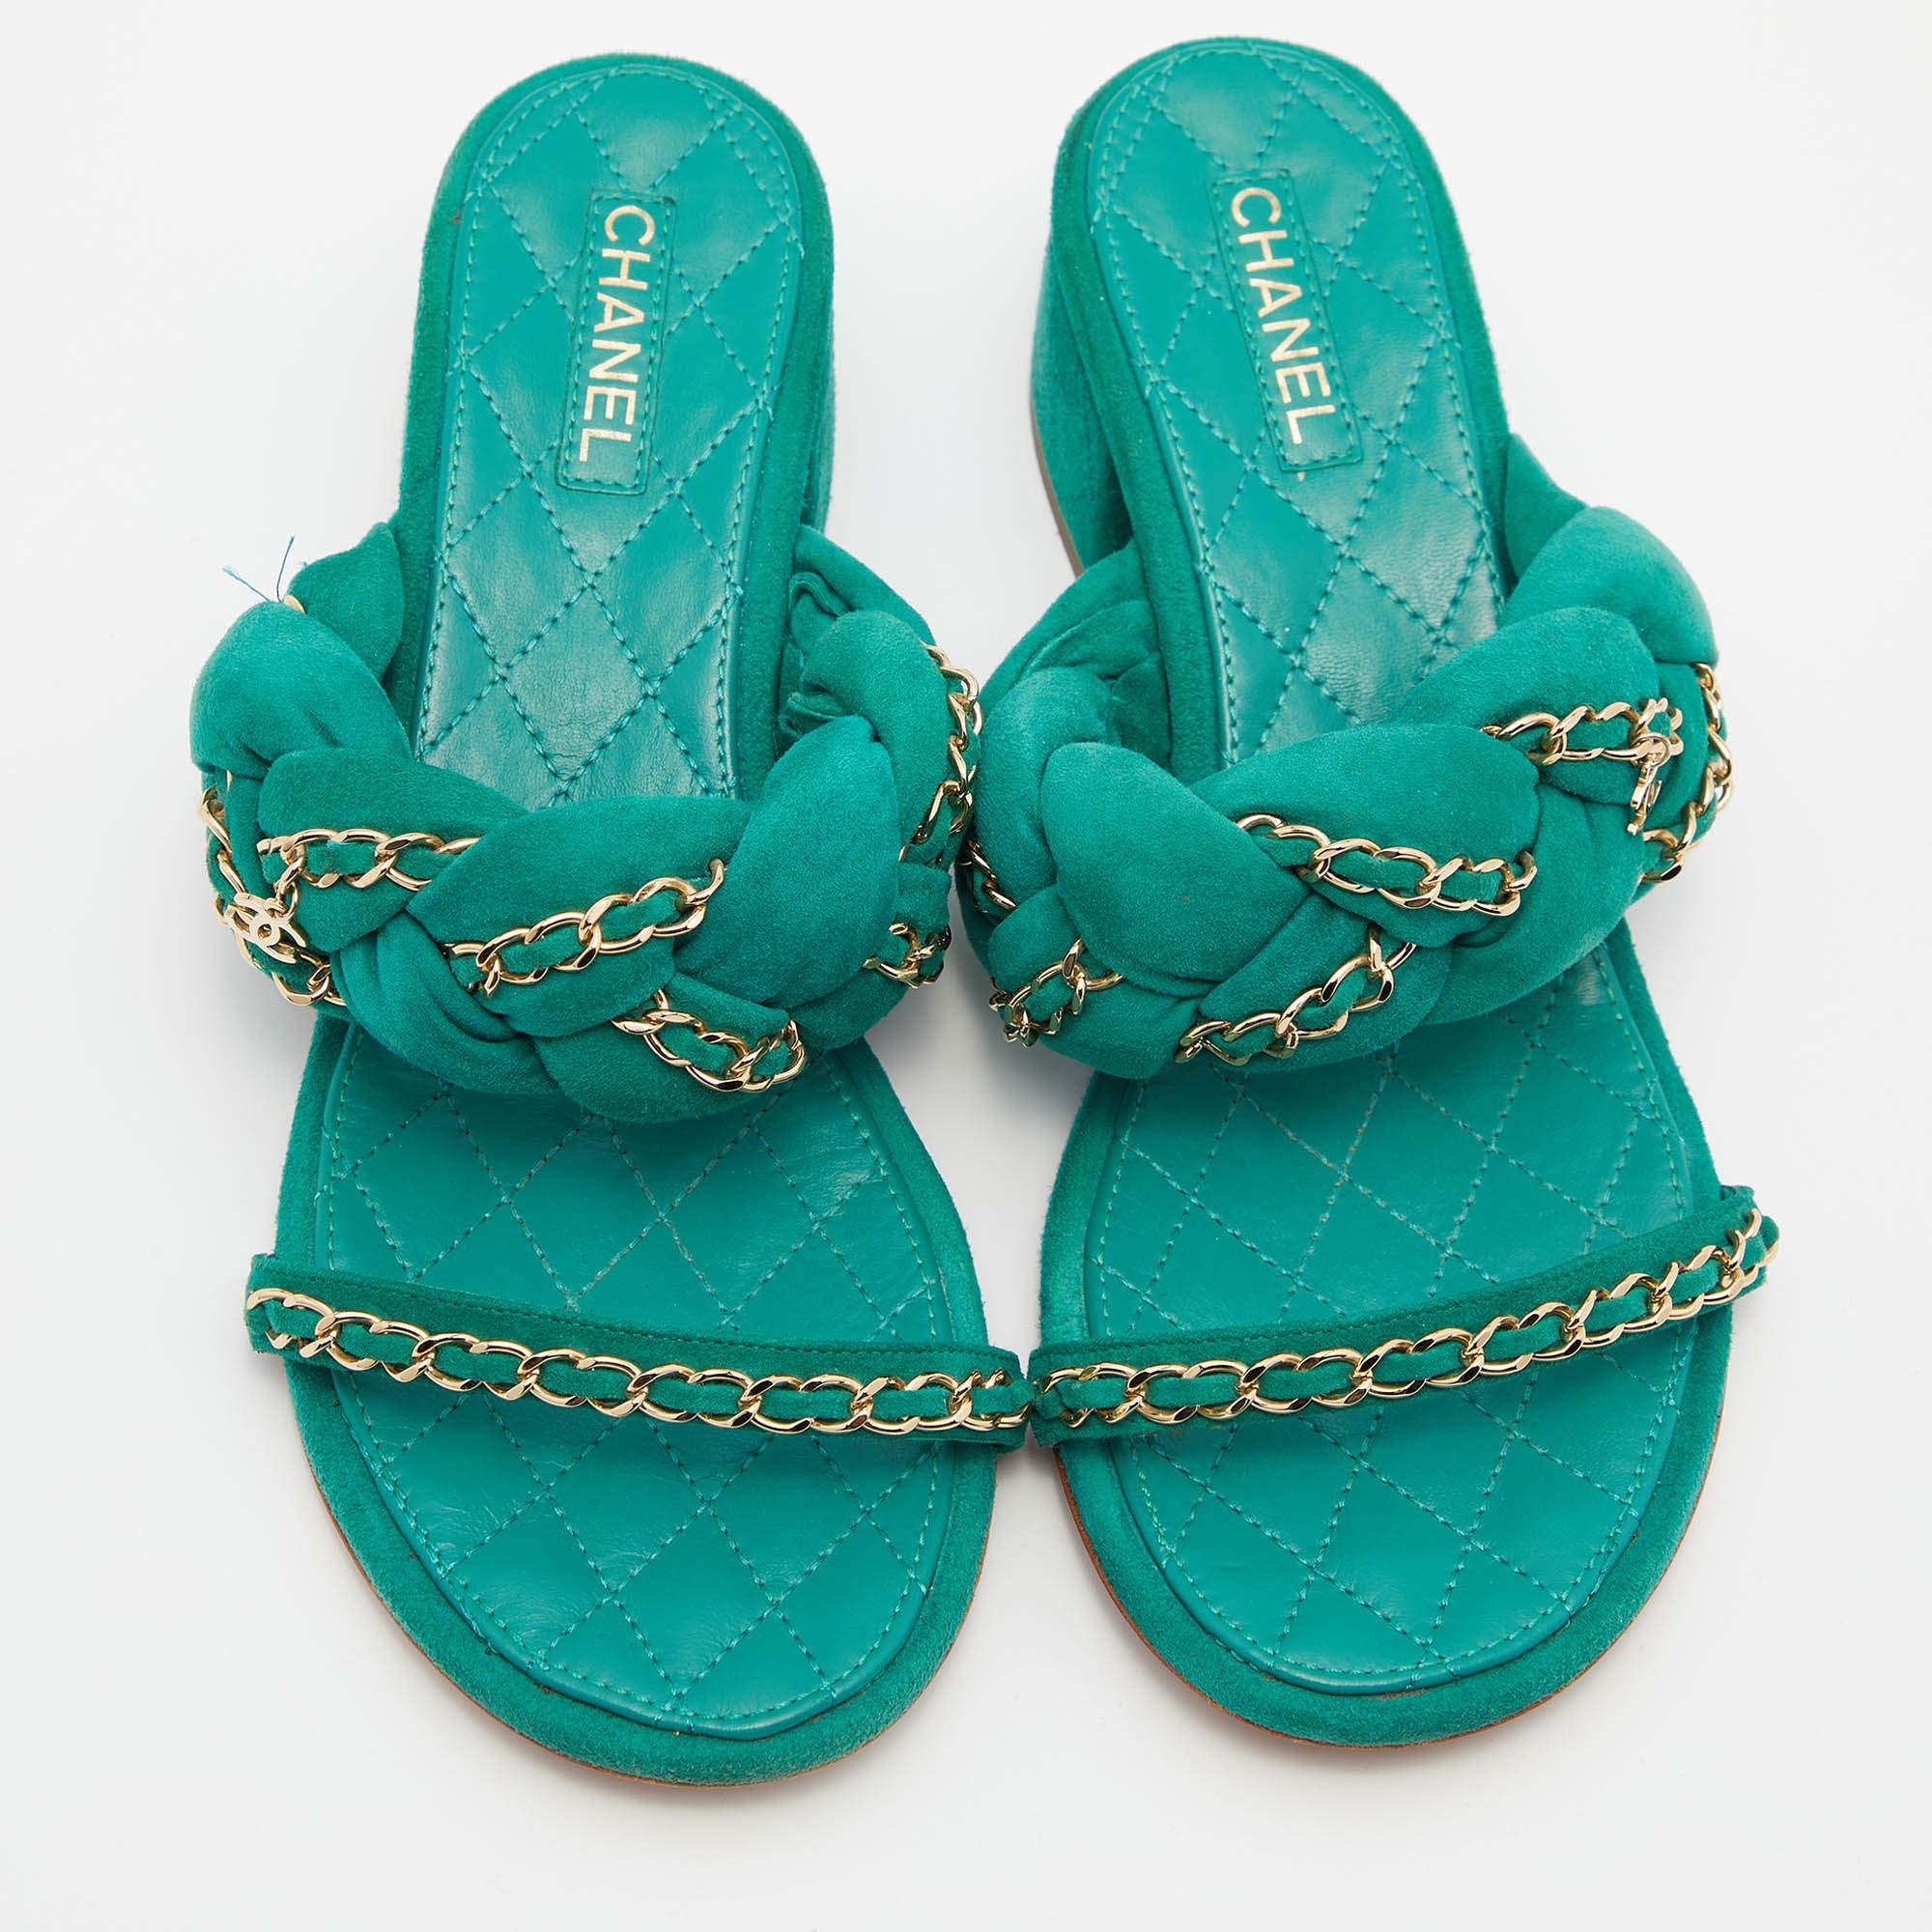 Comfort coupled with fashion creates wonders and these sandals from Chanel are a true example of that. These green sandals are crafted from suede and feature an open-toe silhouette. They flaunt two gold-tone chain embellished straps, one of which